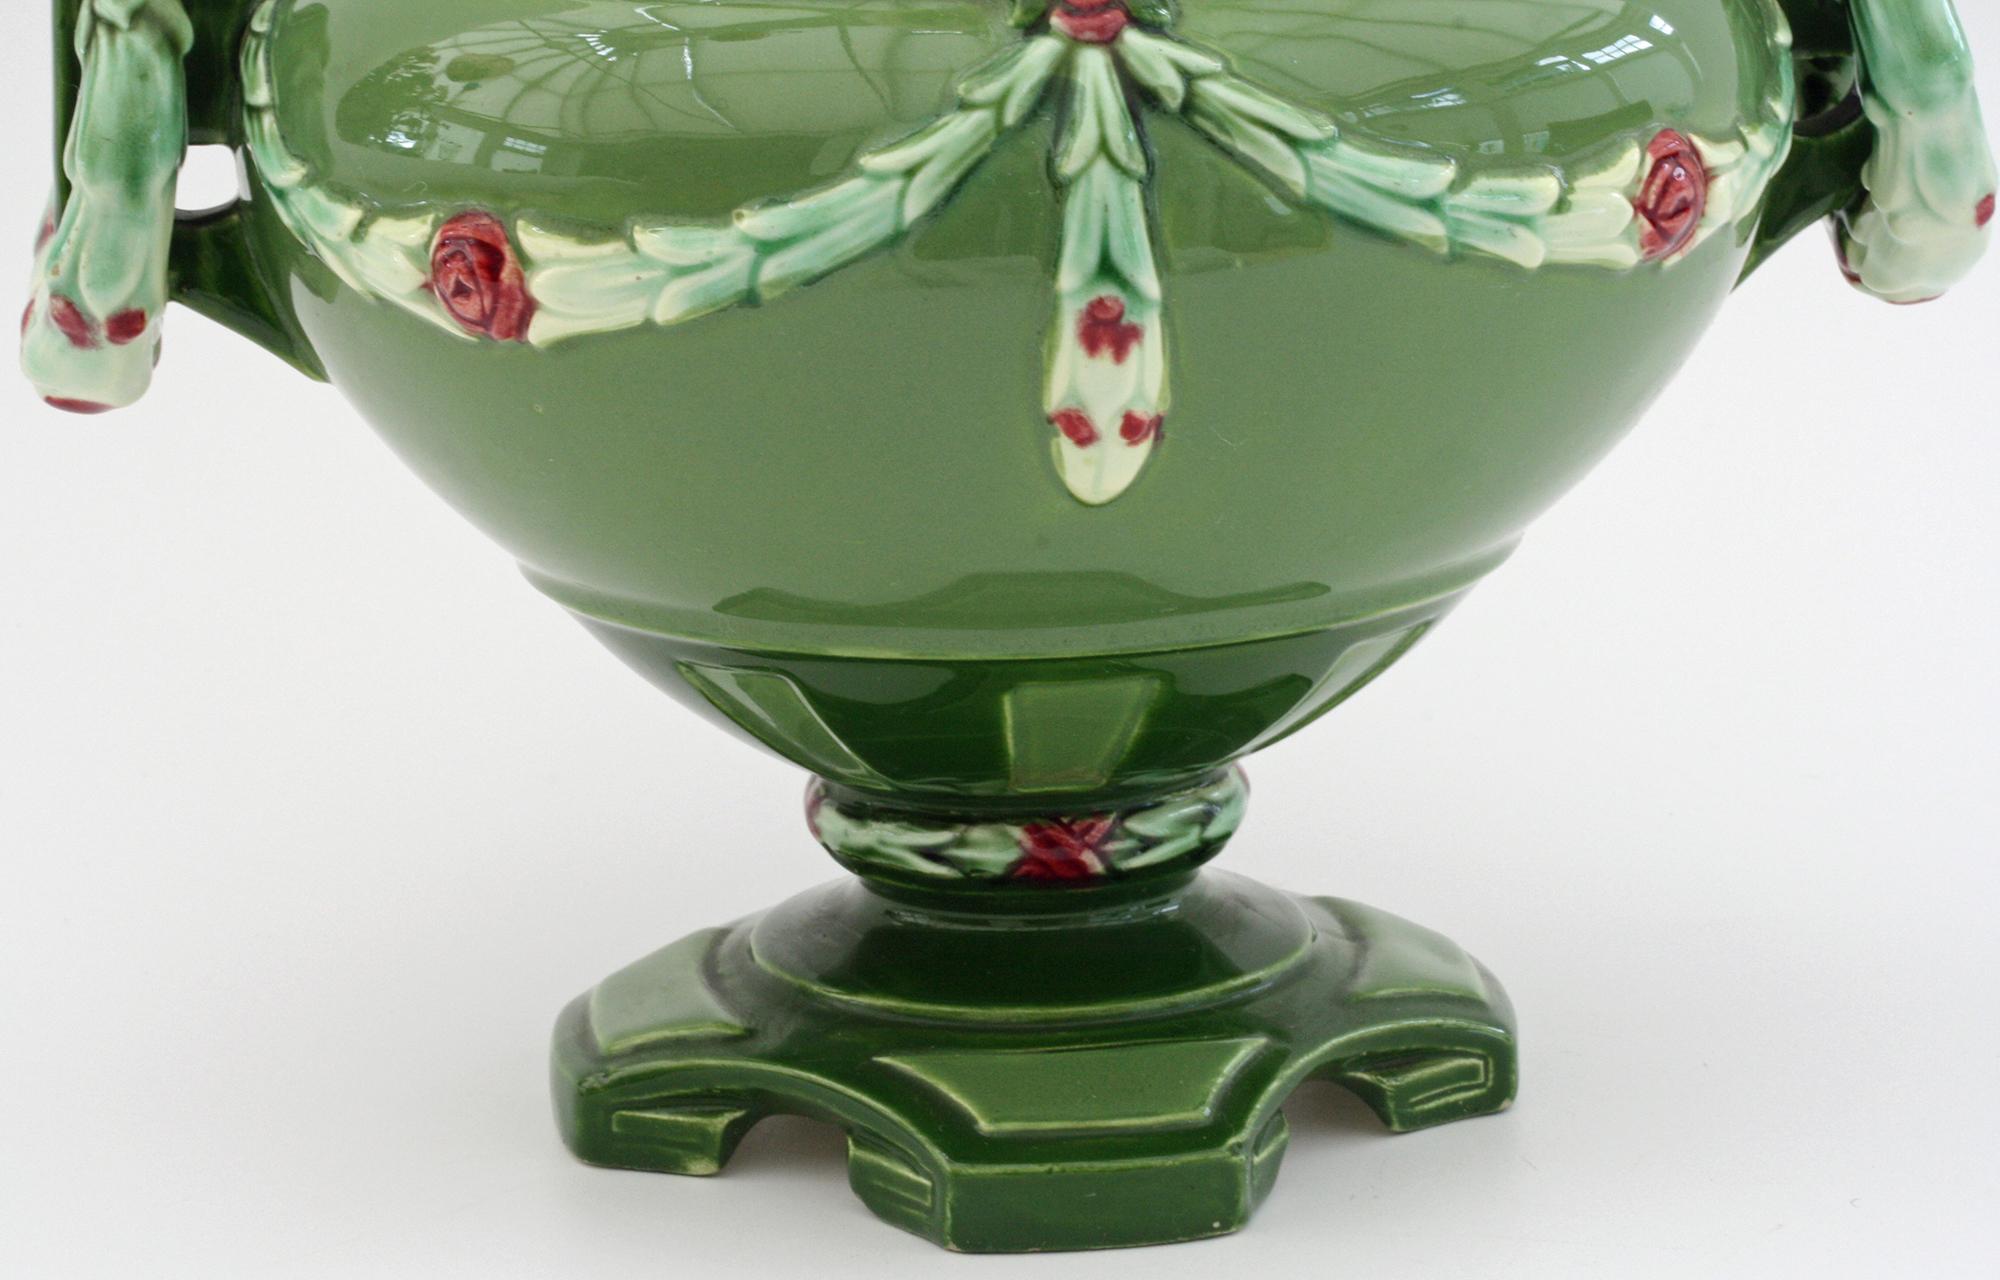 Early 20th Century Eichwald Secessionist Majolica Art Pottery Urn Shaped Vase, 1910